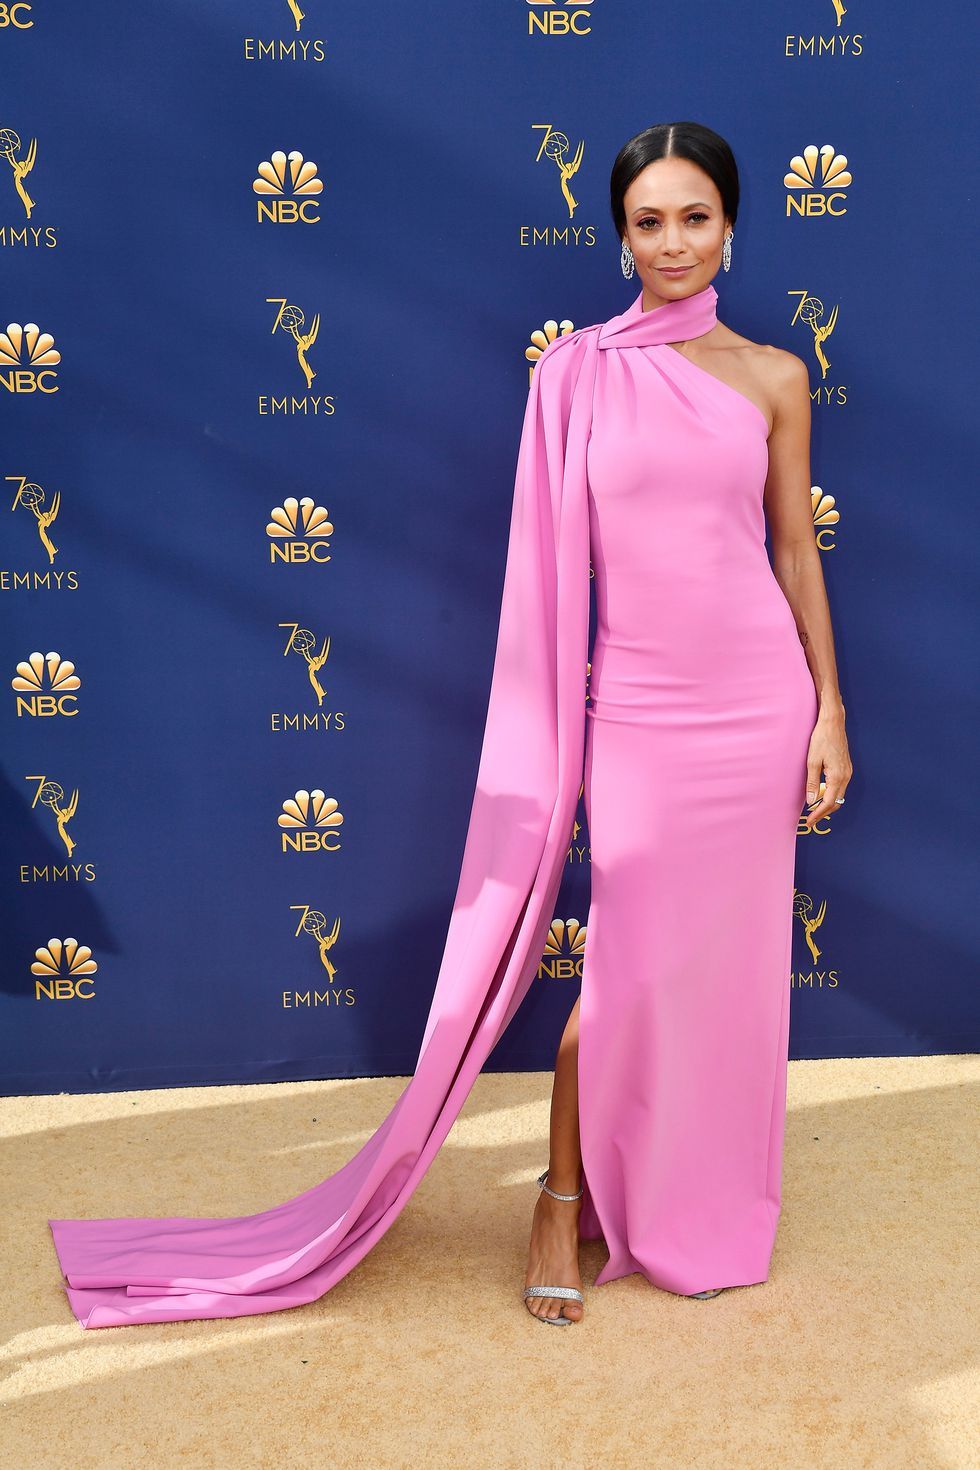 30 Best Dresses and Gowns of 2018 - Best Red Carpet 2018